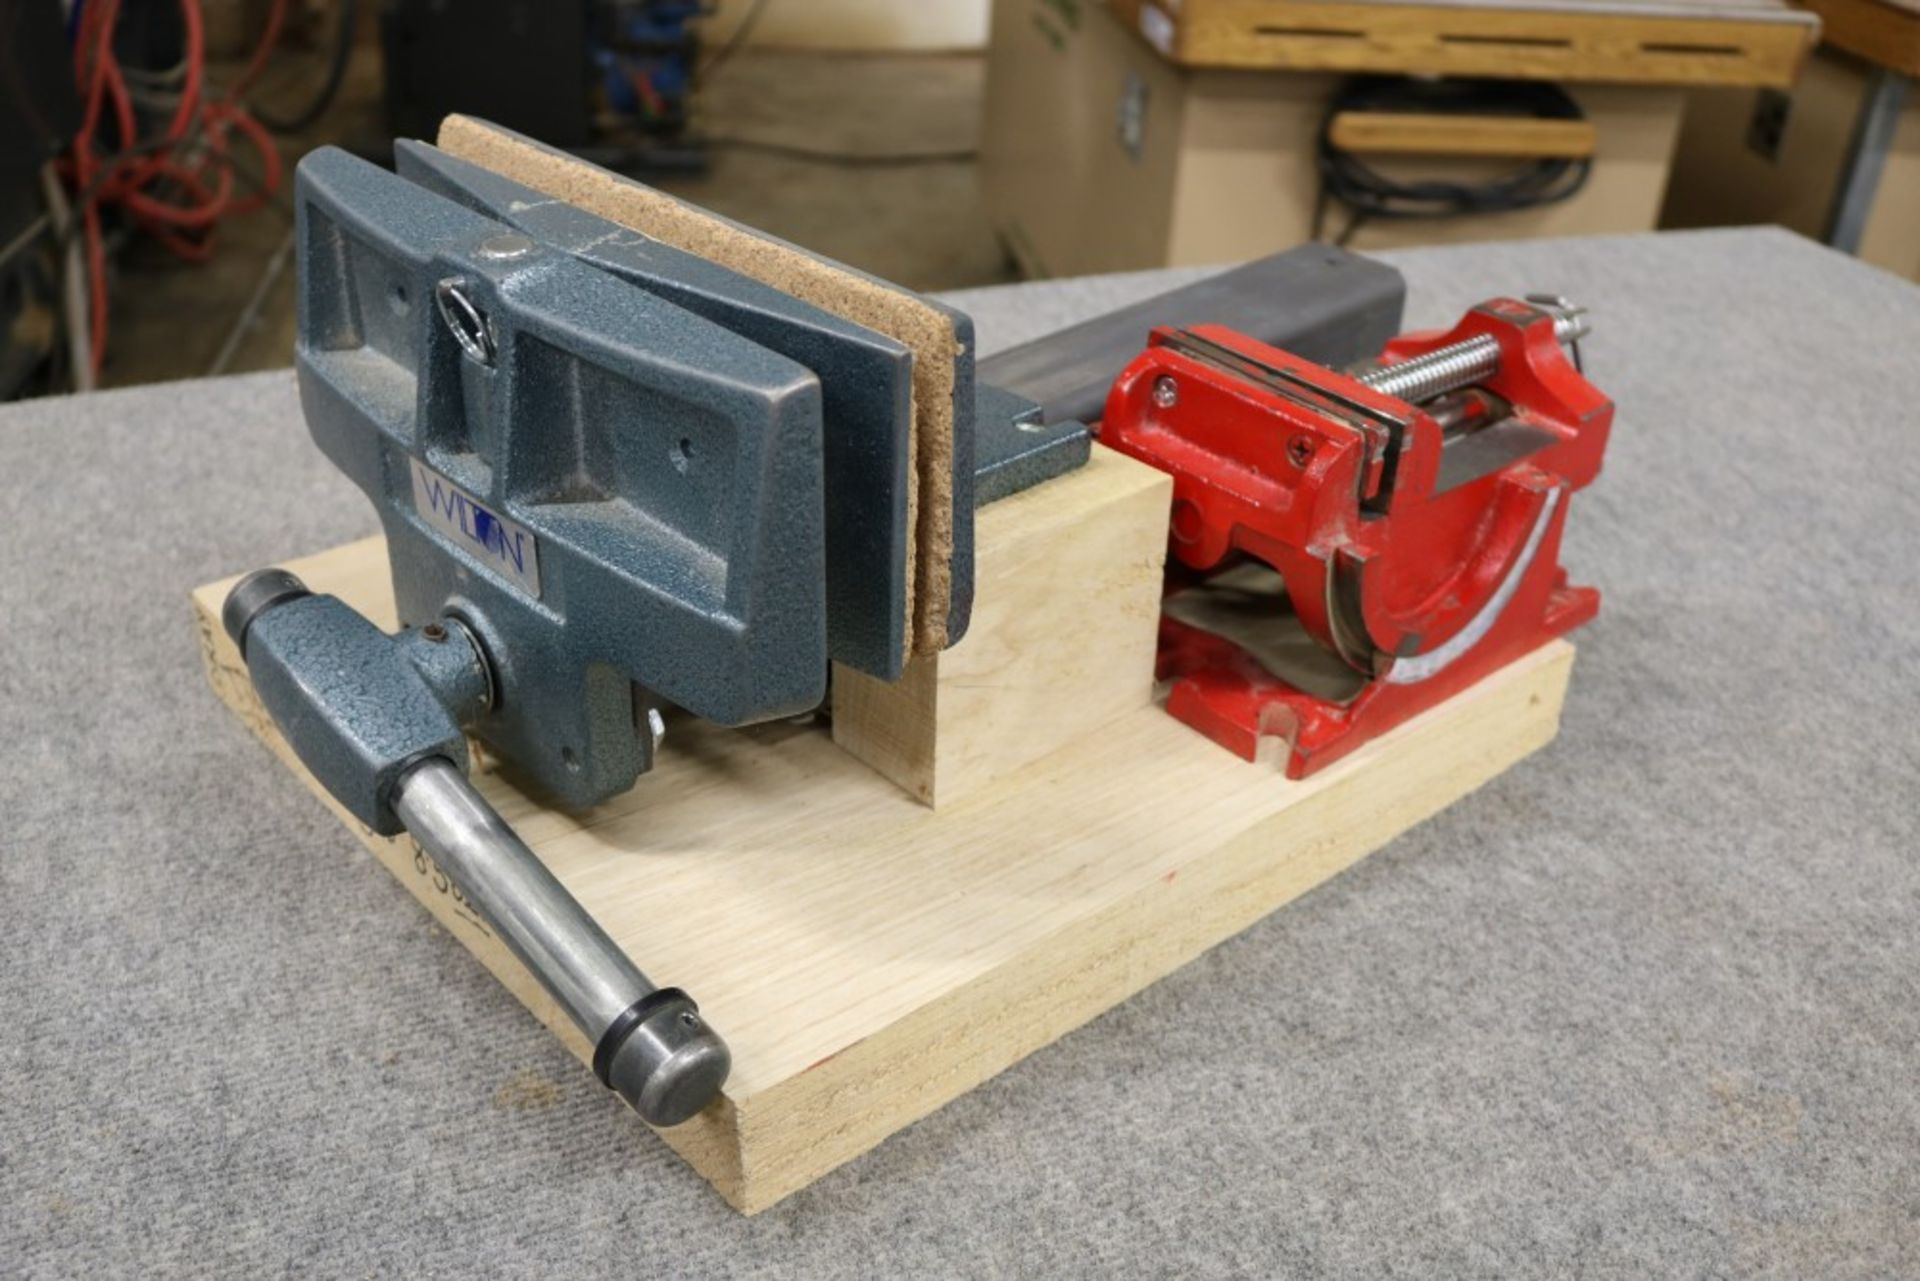 Wilton 10" Heavy Duty Vise and 4" Table Top 90 Degree Swivel Vise - Image 6 of 7